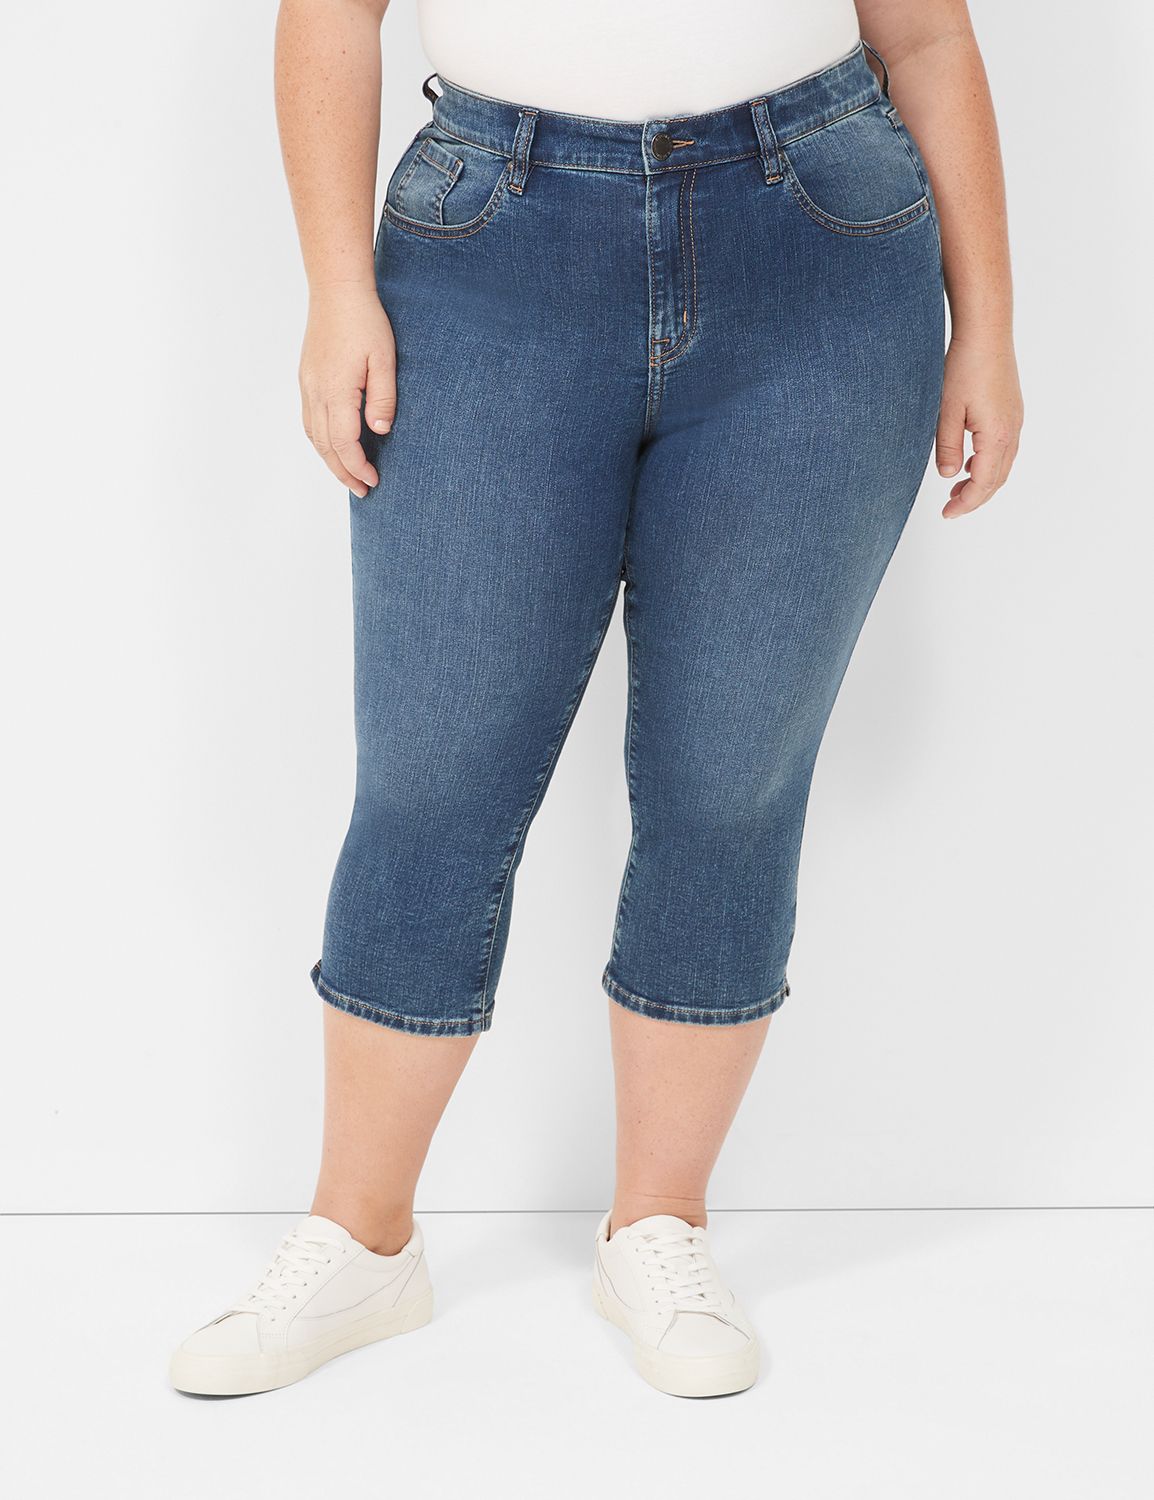 Lane Bryant Plus Magic Waistband Deluxe Fit Low Rise Skinny Denim Jeans  Size 14 Blue - $23 - From Jen